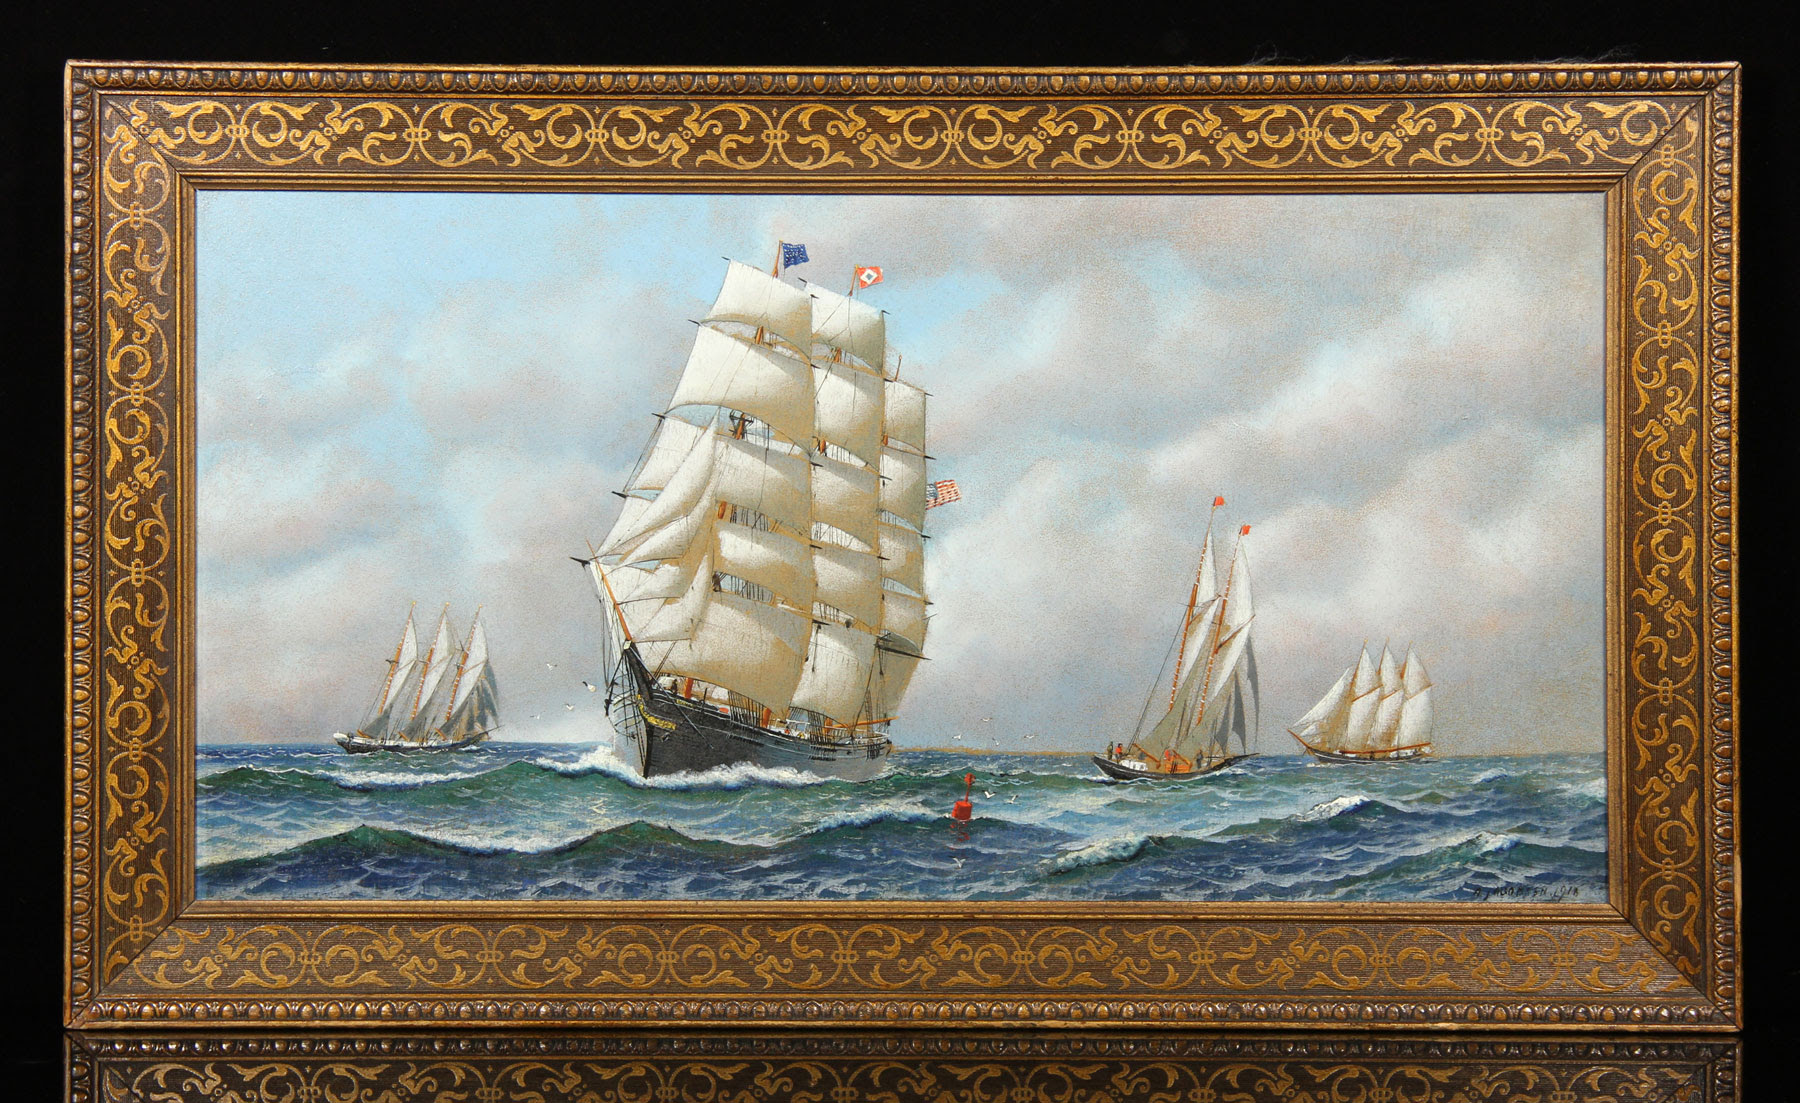 Antonio Jacobsen (Danish-American, 1850-1921), full clipper ship, oil on artist board, signed and dated 1918, in original frame, 11 3/4in x 22 3/4in (view), 15in x 26in (frame). Kaminski Auctions image